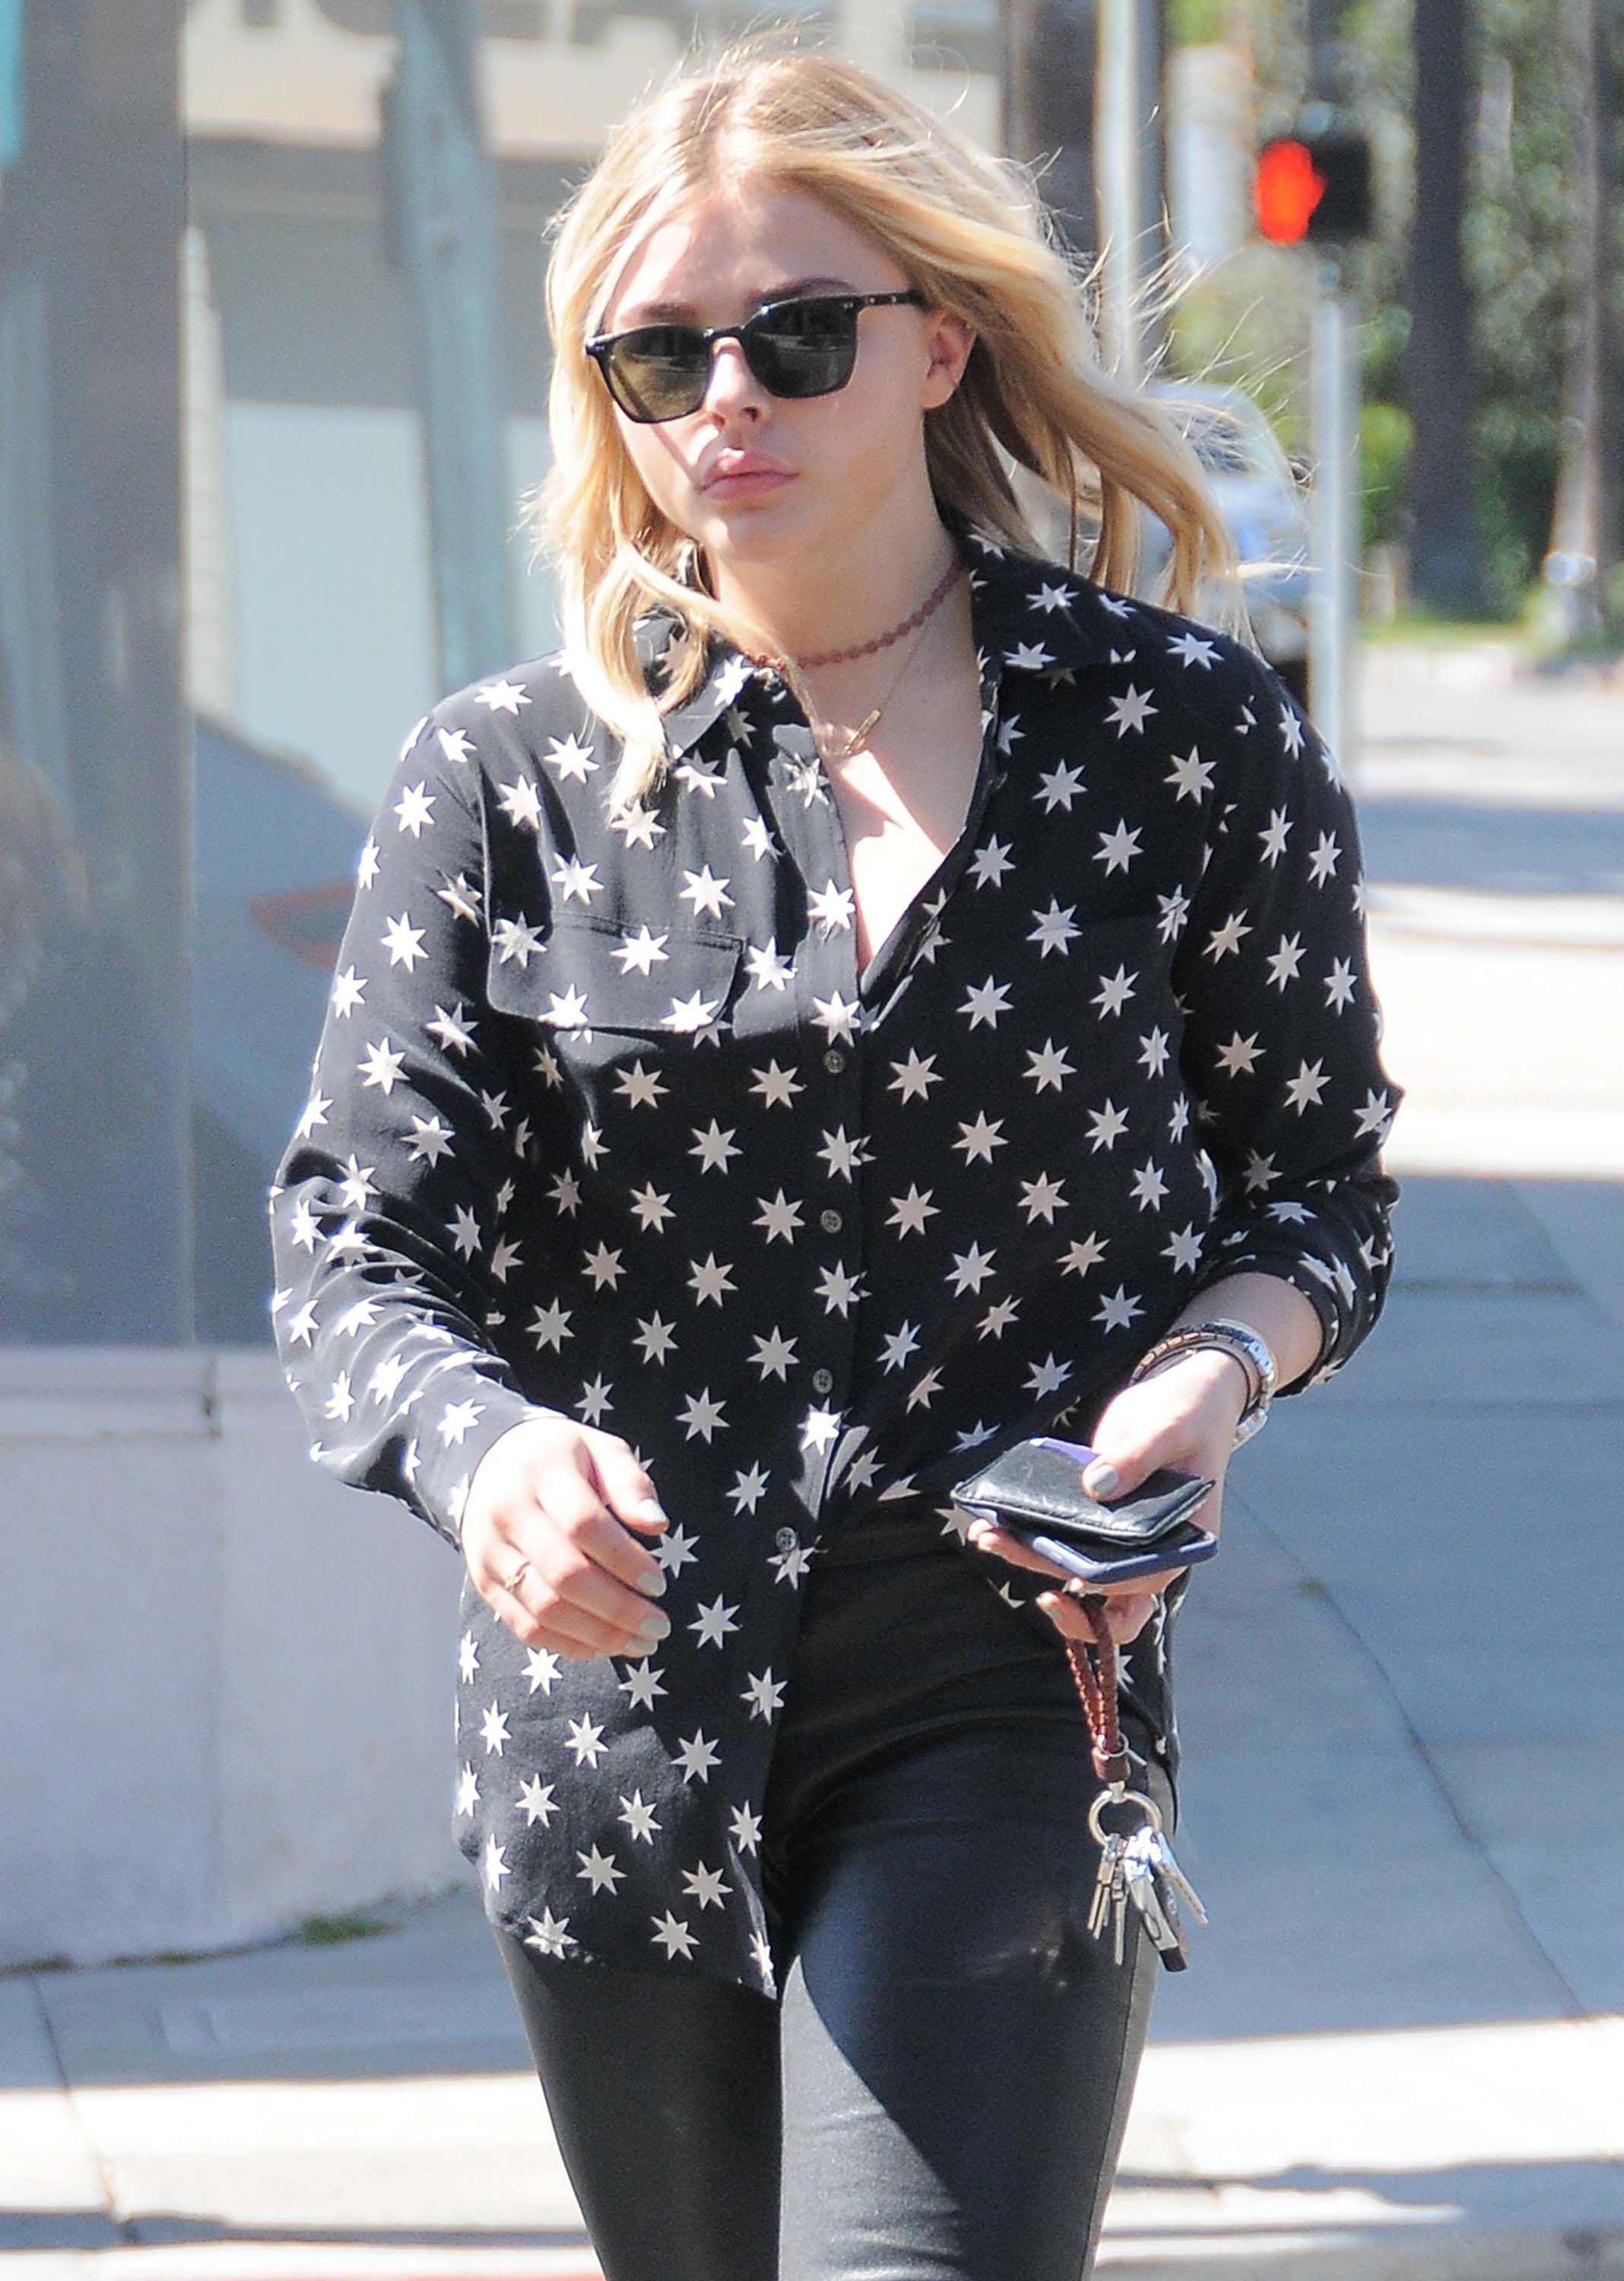 Chloe Moretz shopping at Rite Aid in Beverly Hills